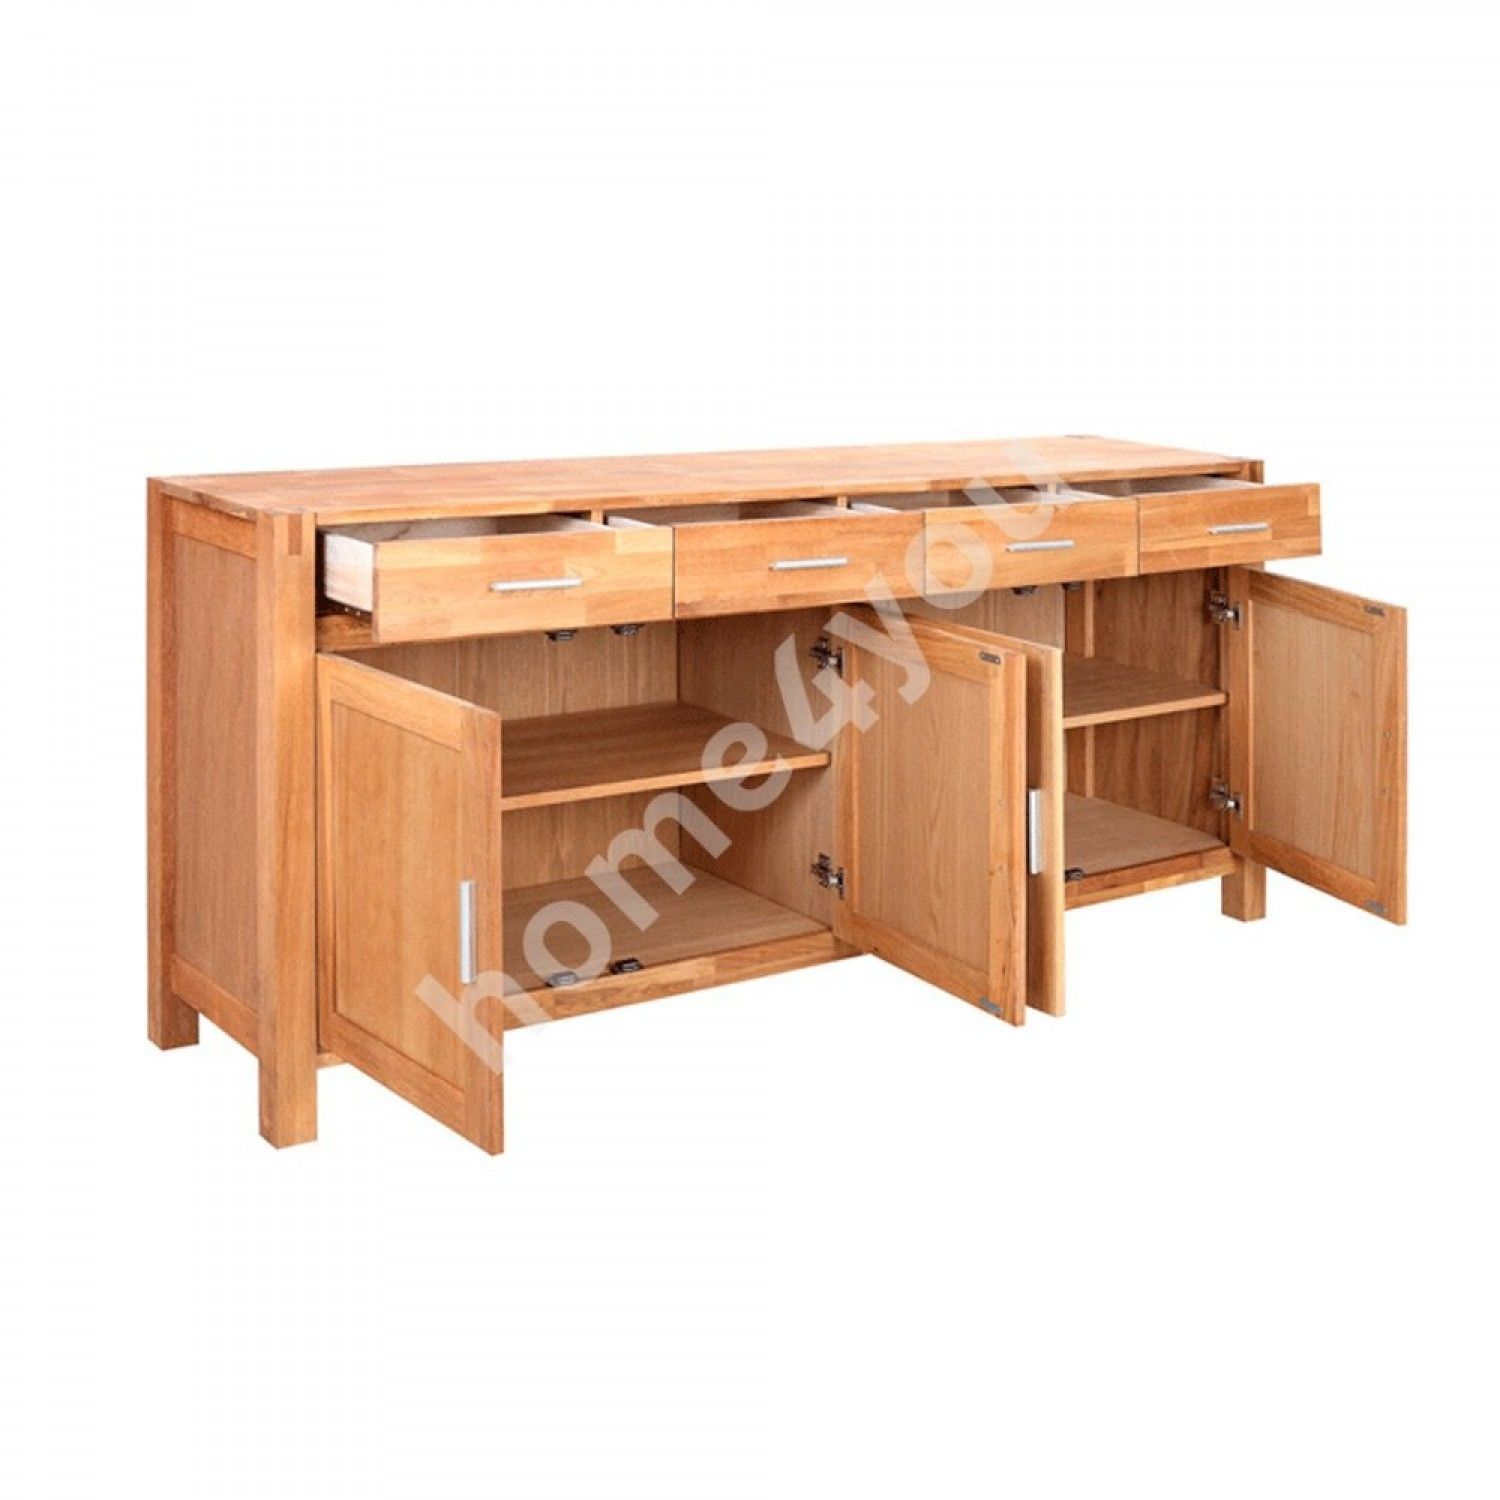 Sideboard Chicago New With 4 Doors And 4 Drawers, 180x44xh86cm, Wood Within Natural Oak Wood 2 Door Sideboards (View 29 of 30)